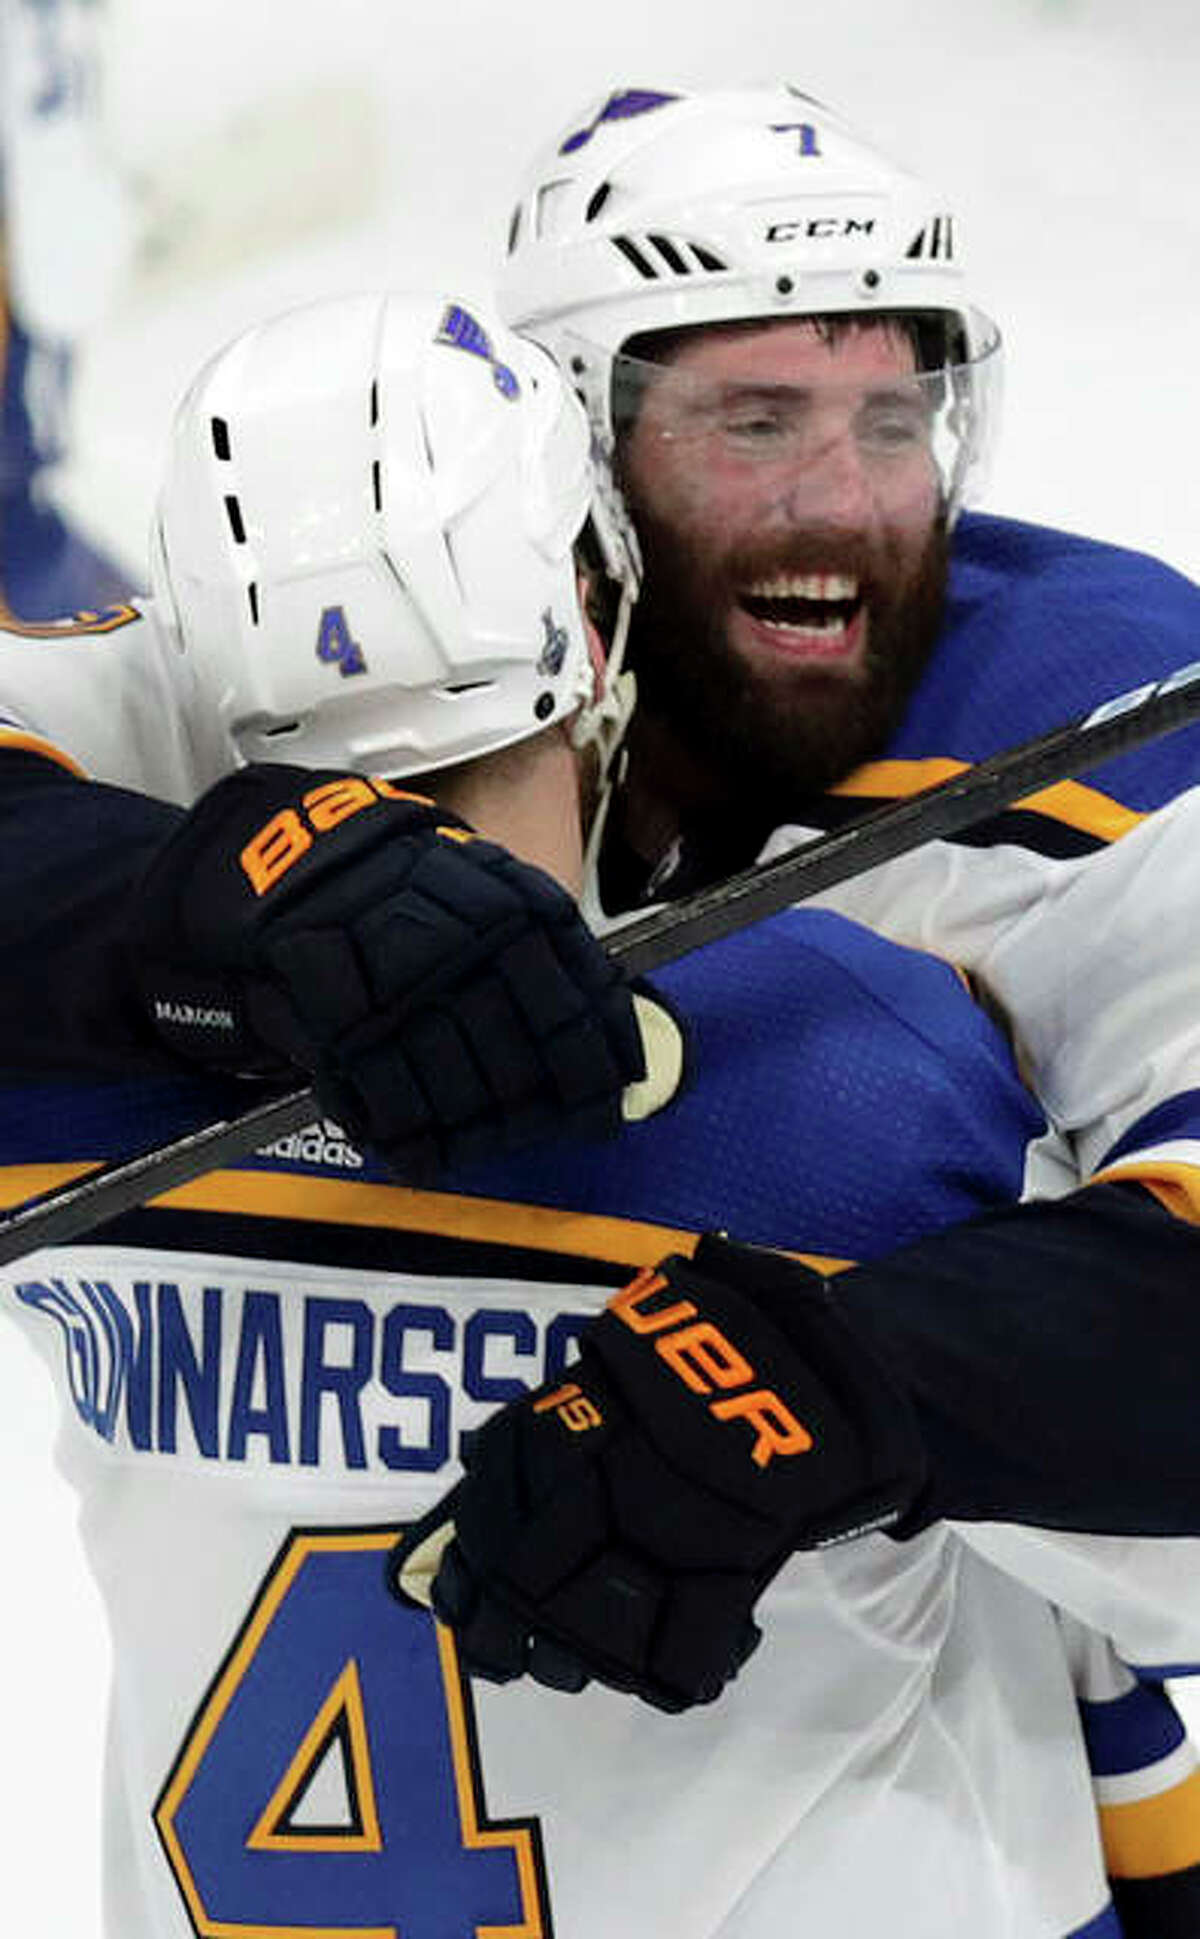 NHL free agency: Patrick Maroon signs with Blues